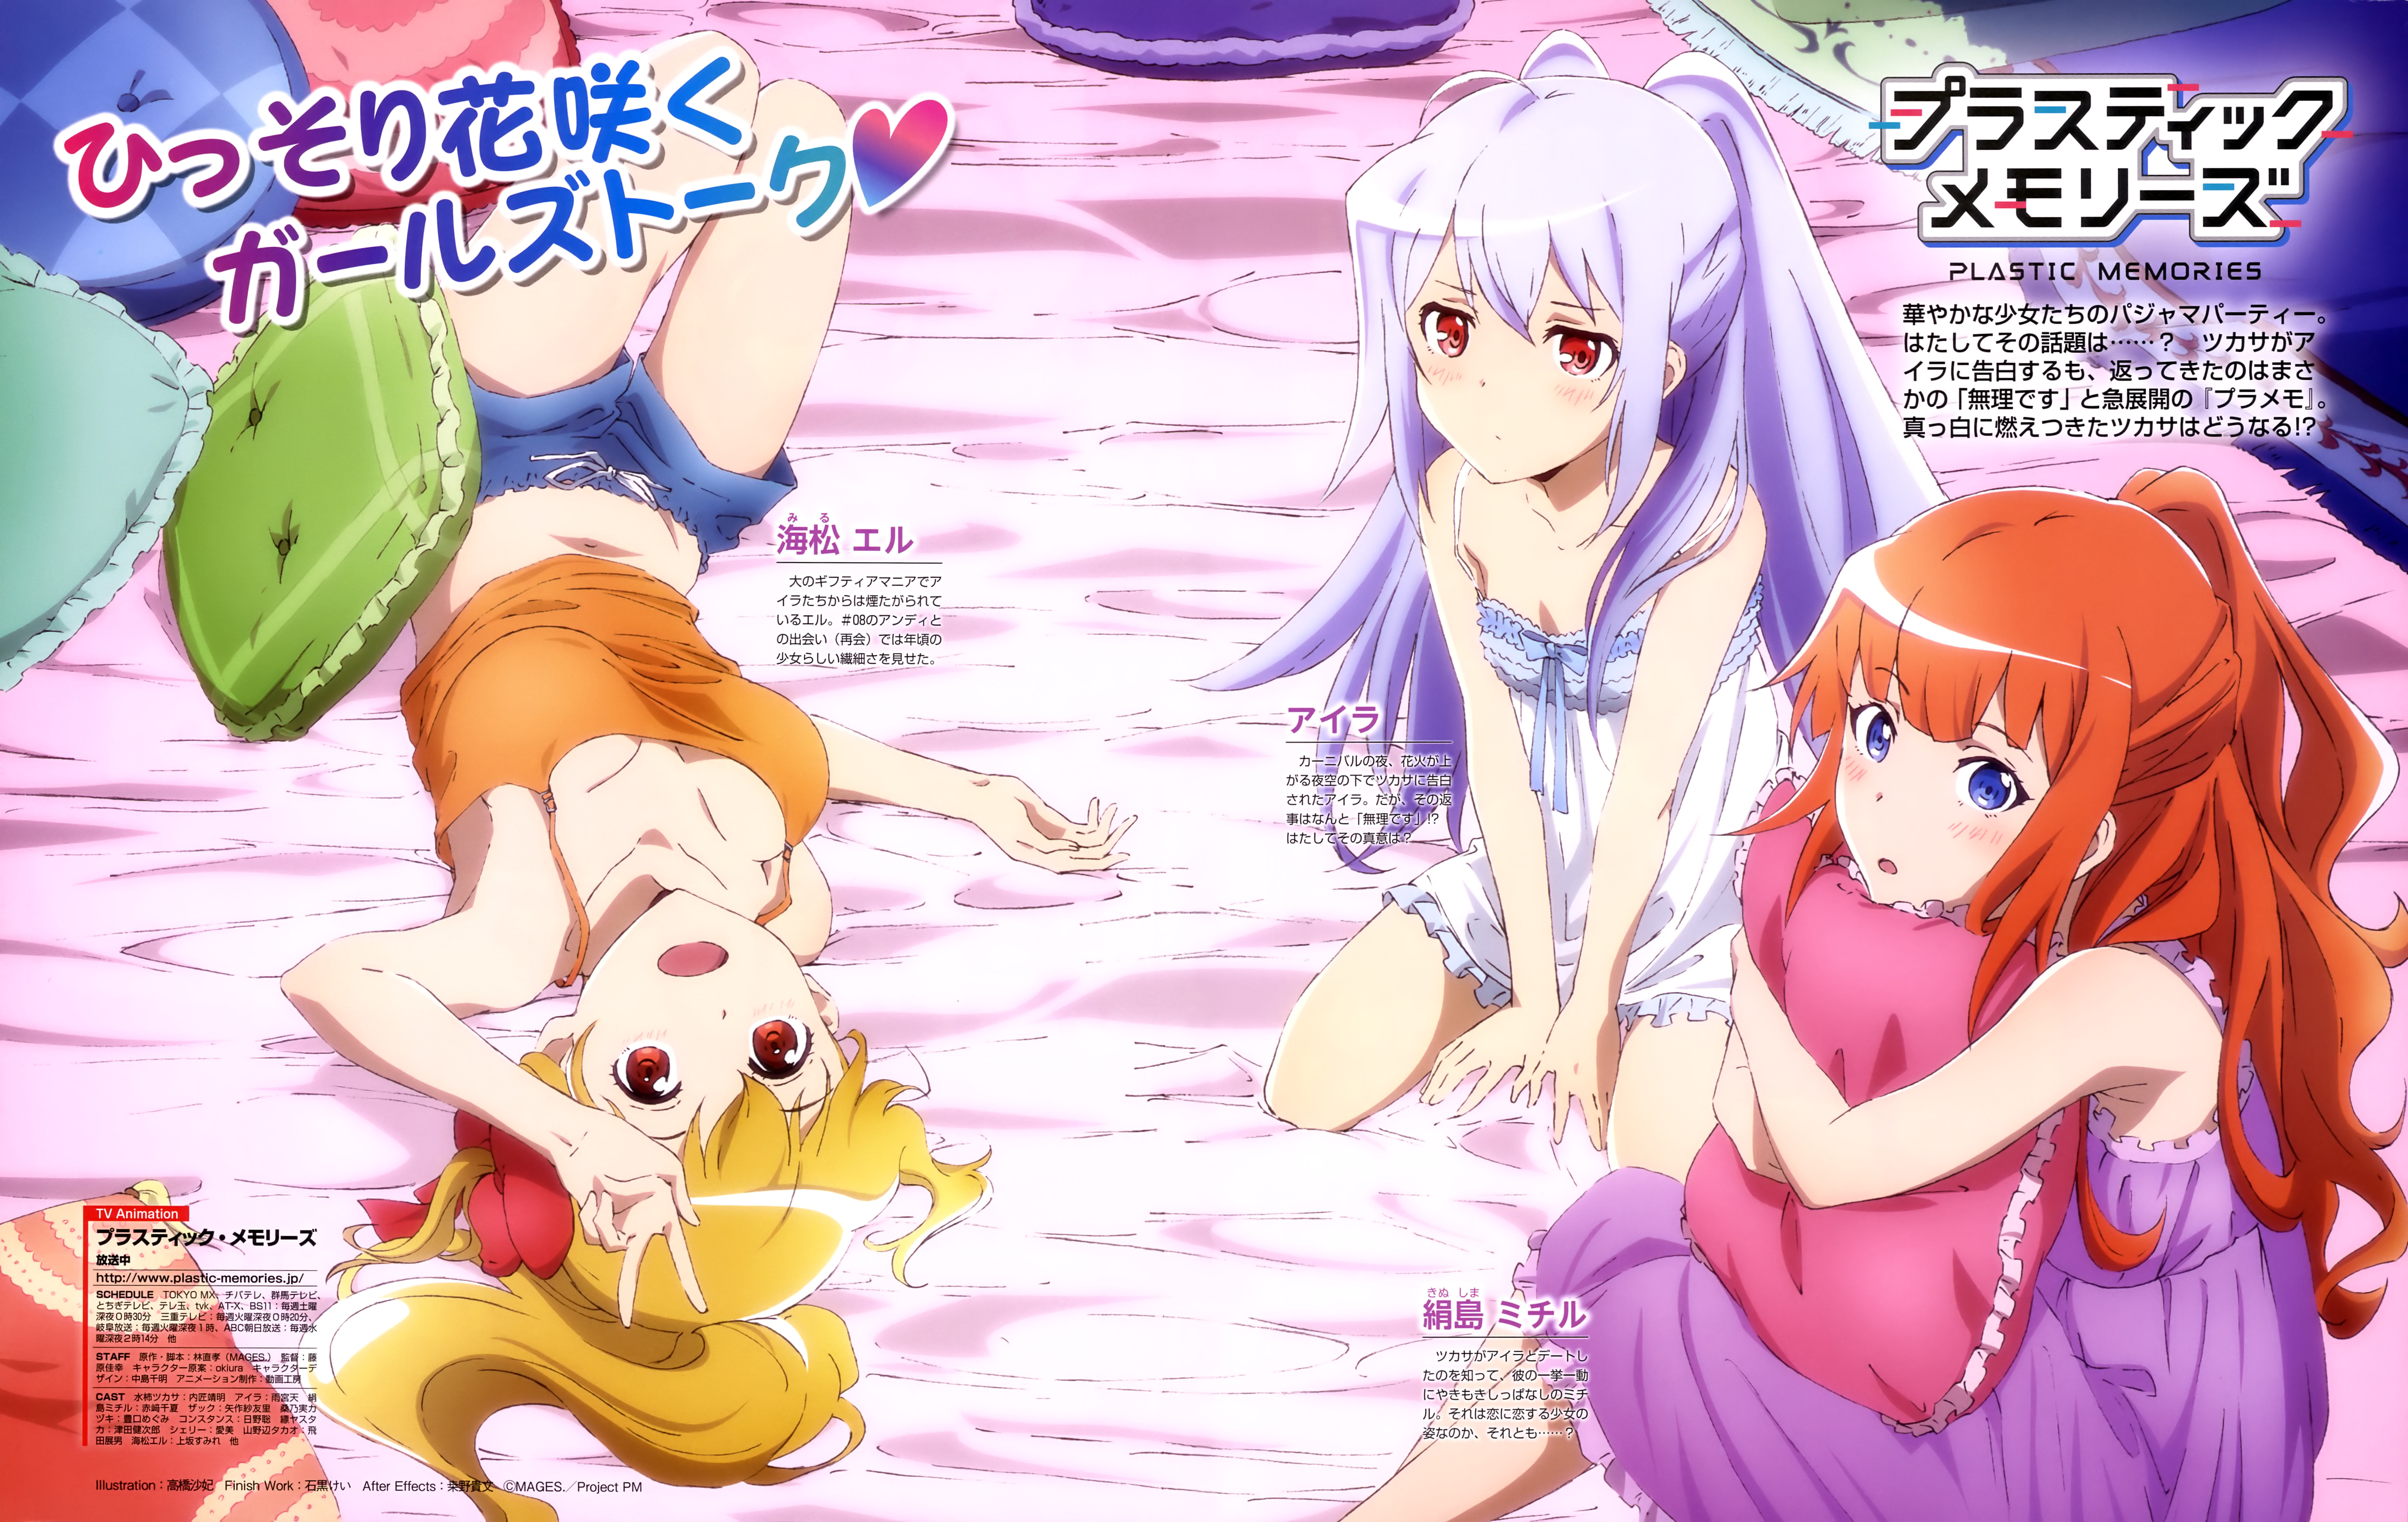 The Girls From Plastic Memories Have A Sleepover In This New Visual Haruhichan